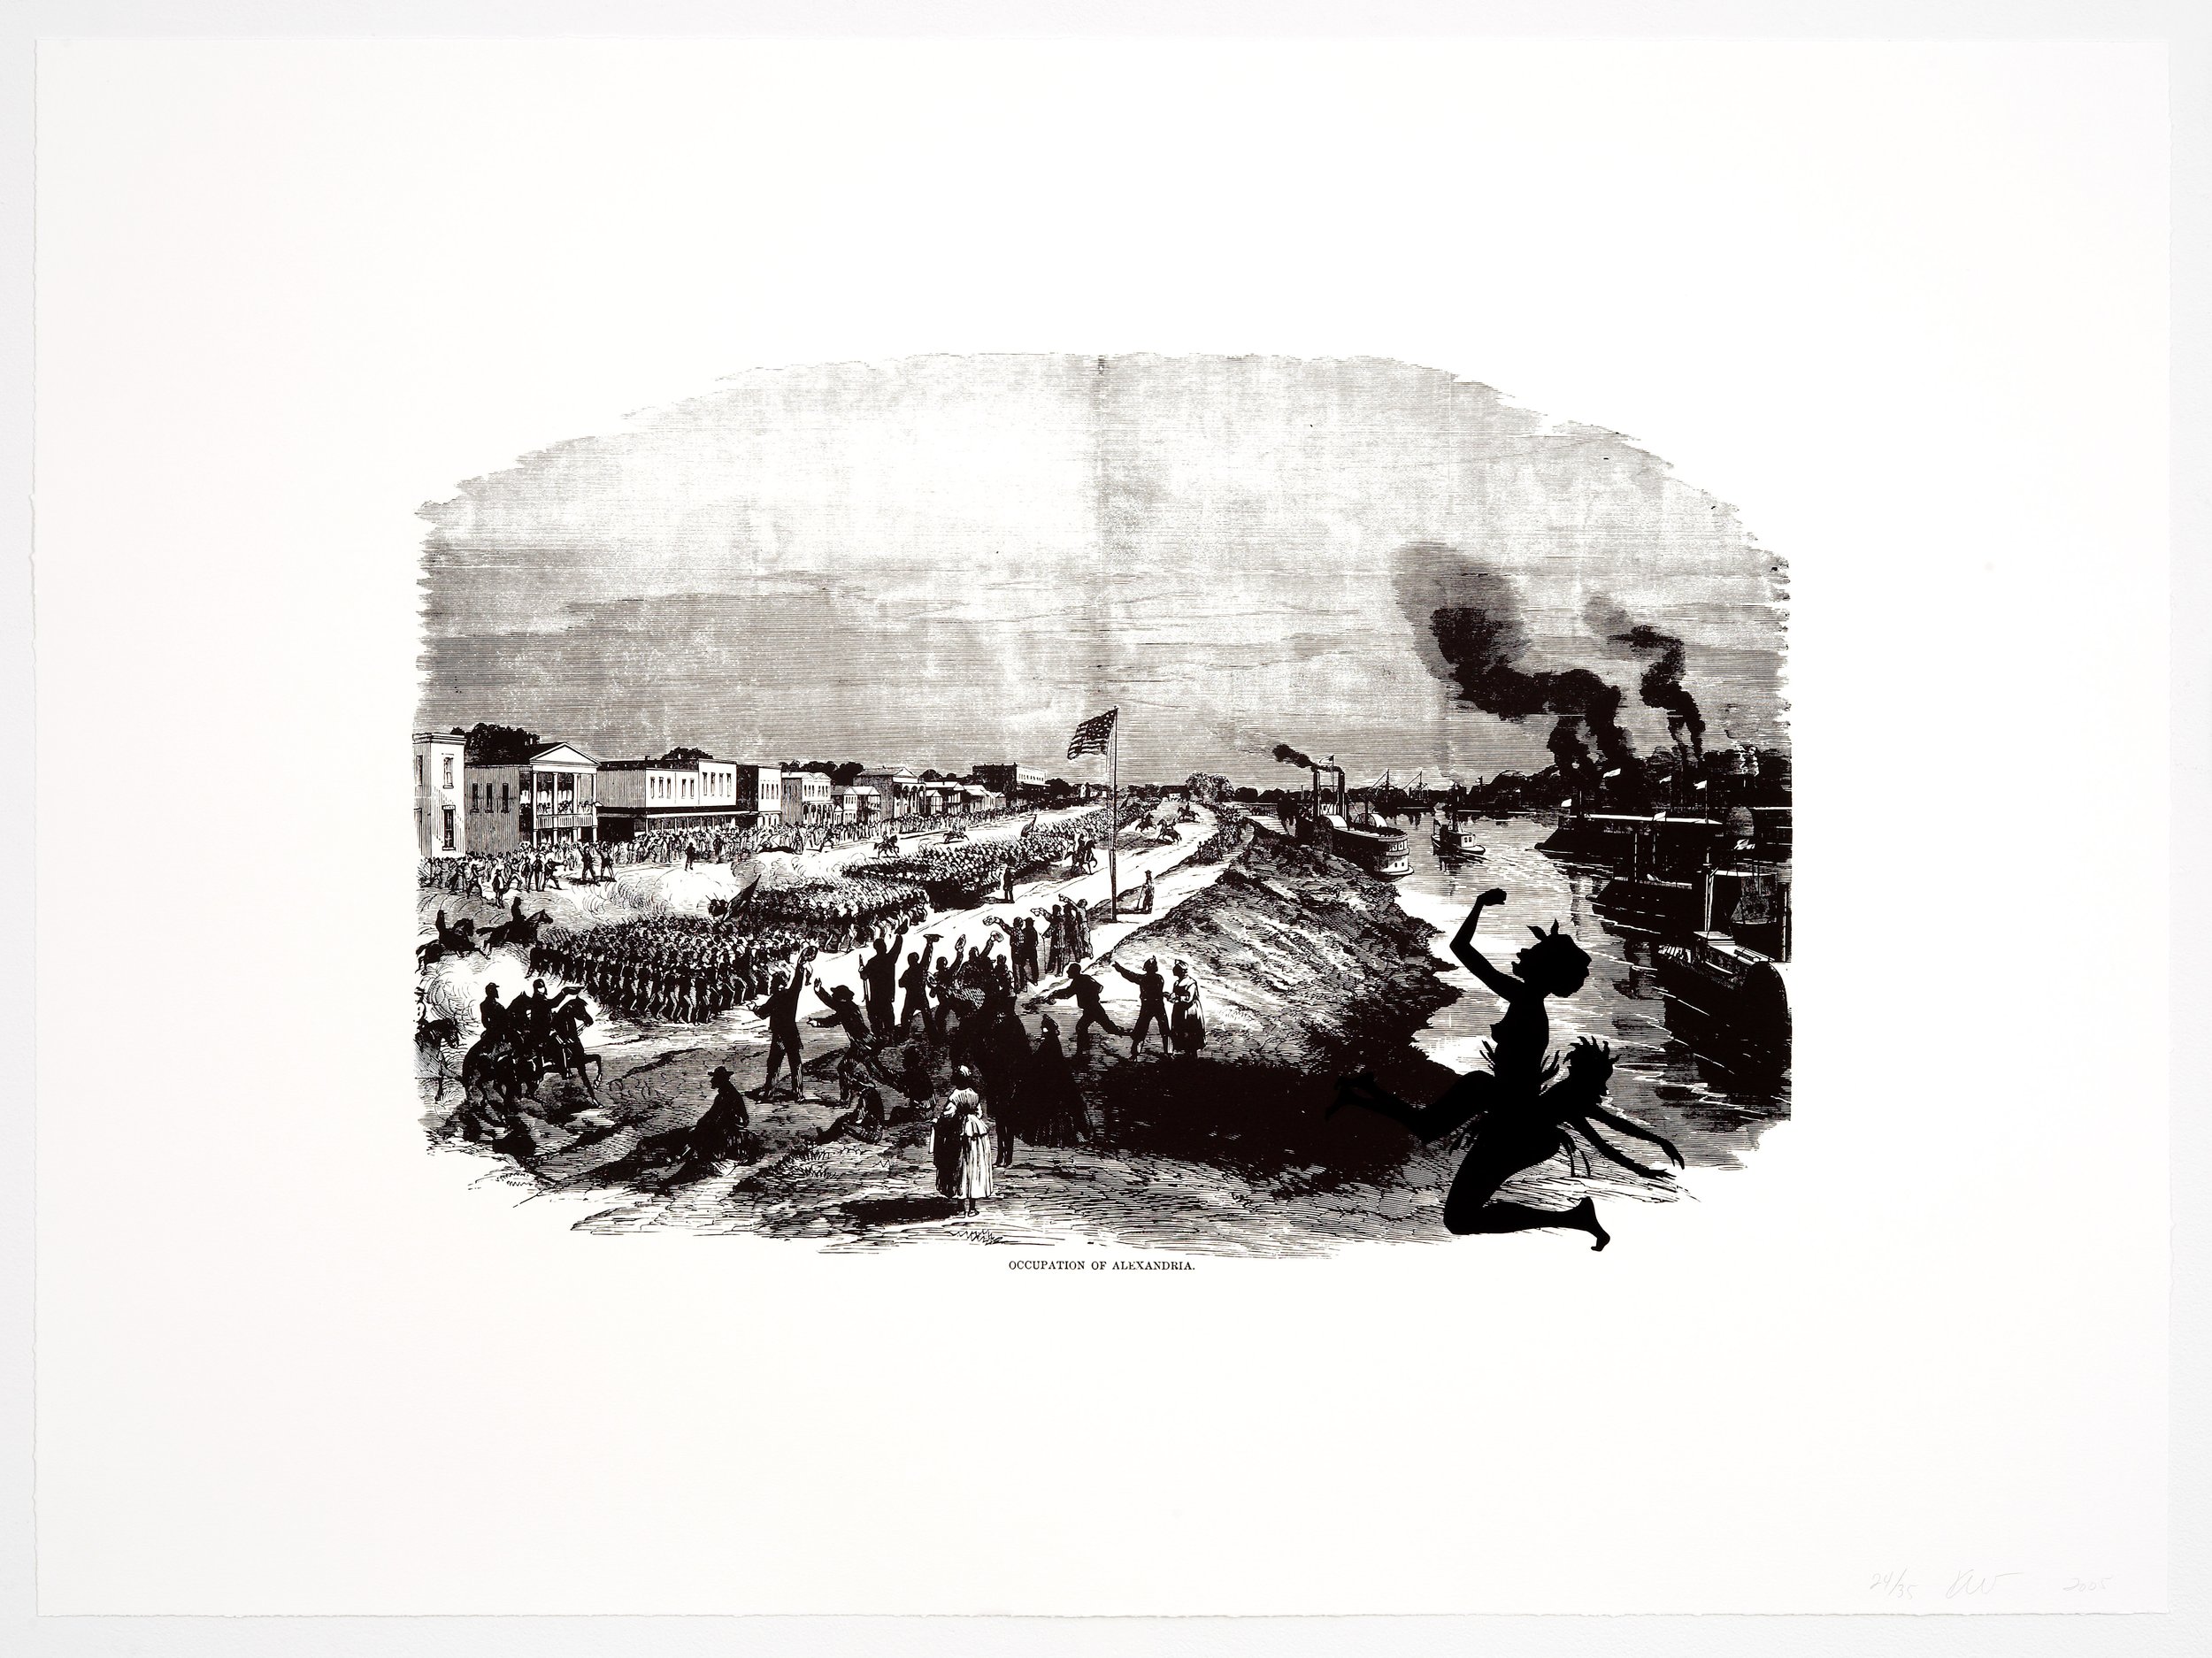   Kara Walker  United States, born 1969  Occupation of Alexandria , 2005 offset lithography and screenprint, 39 3/8 x 53 1/8 inches Museum purchase with support from Amy Woodhouse and Tobey Scott, 2019.25 Image courtesy Sikkema Jenkins &amp; Co. 